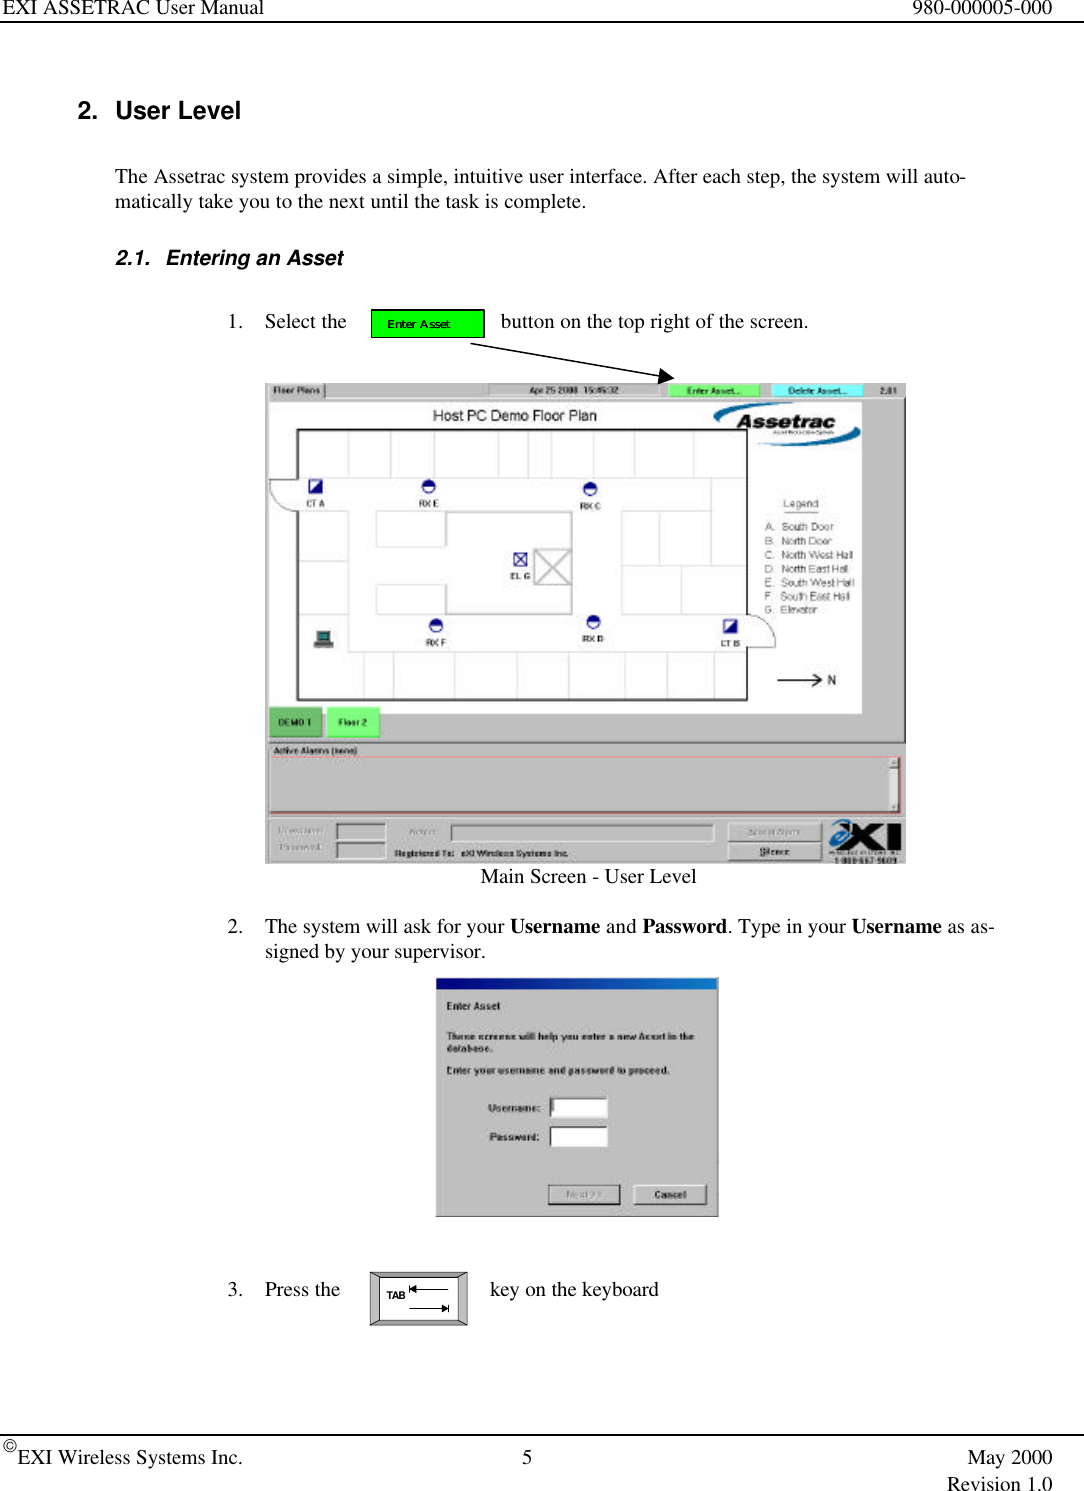 EXI ASSETRAC User Manual 980-000005-000EXI Wireless Systems Inc. 5May 2000Revision 1.0TABEnter AssetEnter Asset2. User LevelThe Assetrac system provides a simple, intuitive user interface. After each step, the system will auto-matically take you to the next until the task is complete.2.1. Entering an Asset1. Select the    button on the top right of the screen.Main Screen - User Level2. The system will ask for your Username and Password. Type in your Username as as-signed by your supervisor.3. Press the  key on the keyboard